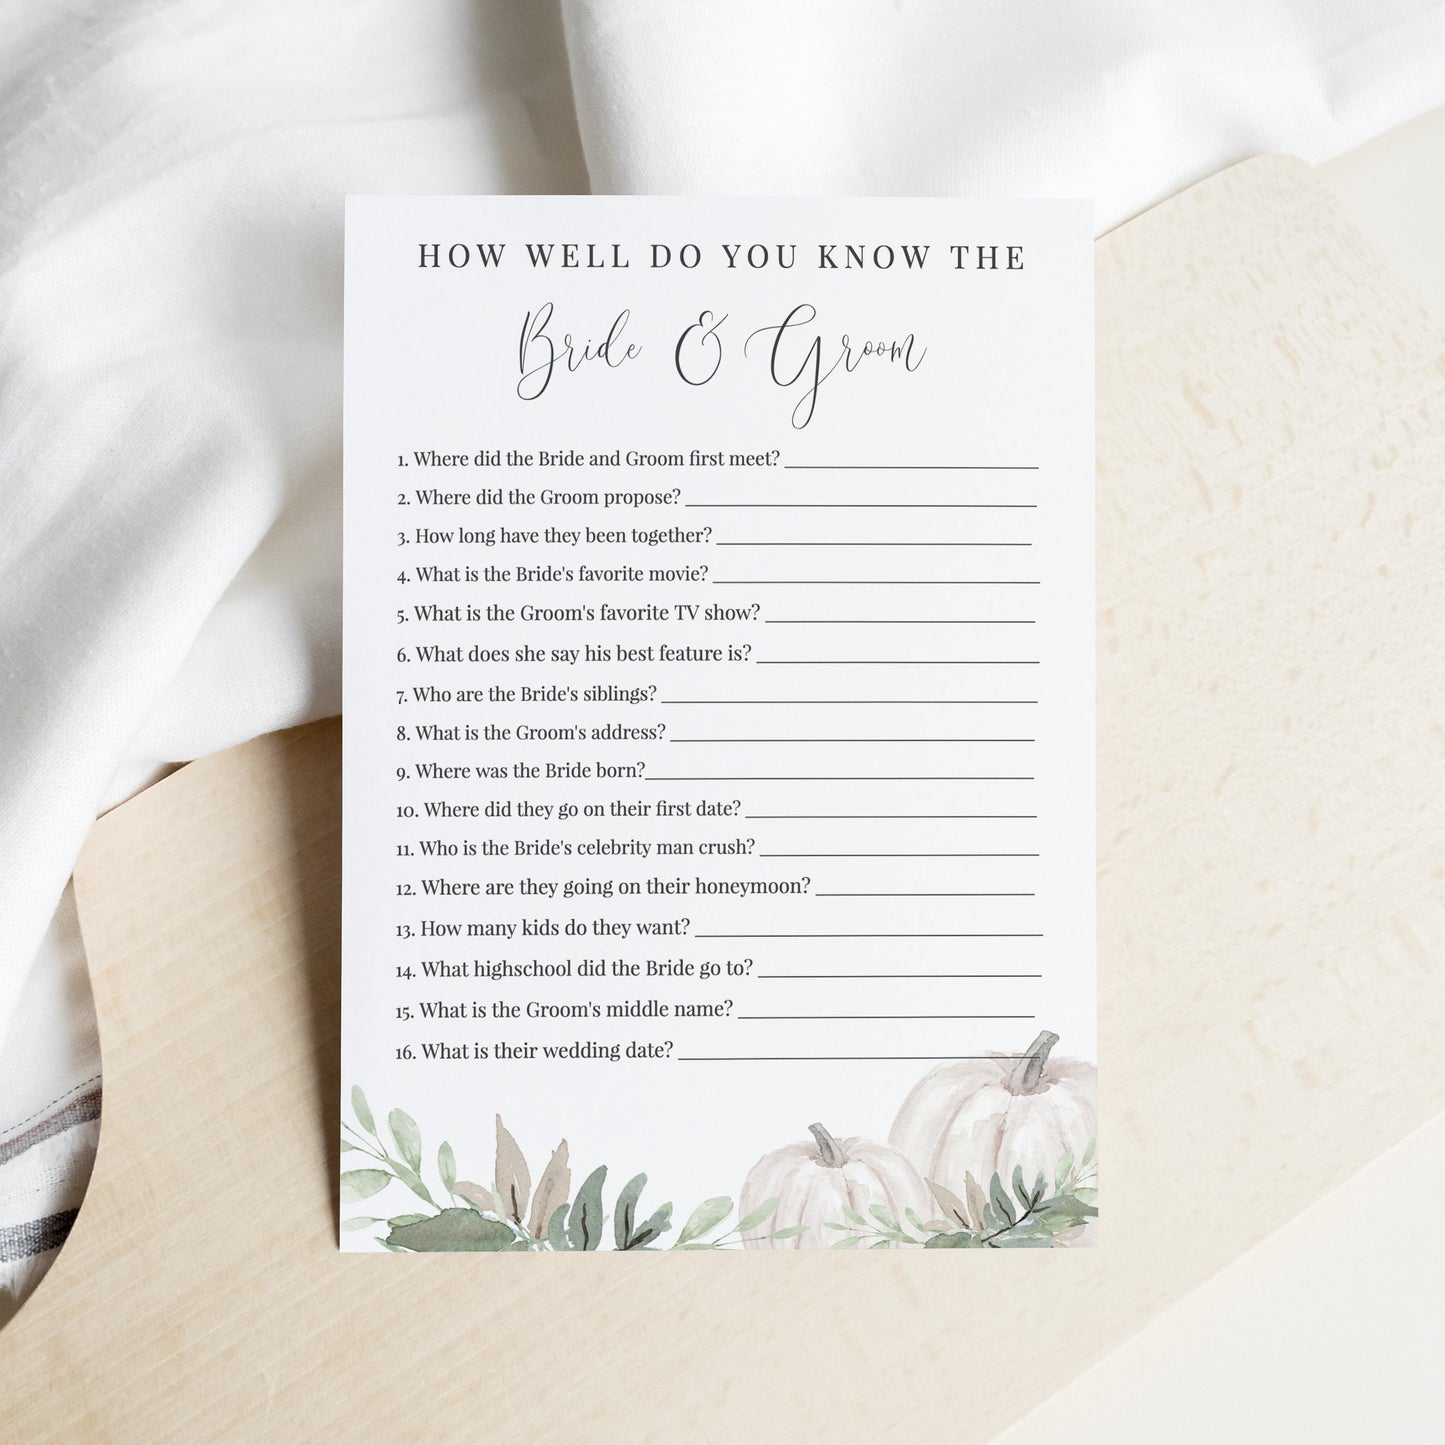 Editable How Well Do You Know the Bride and Groom Bridal Shower Games White Sage Pumpkin Template